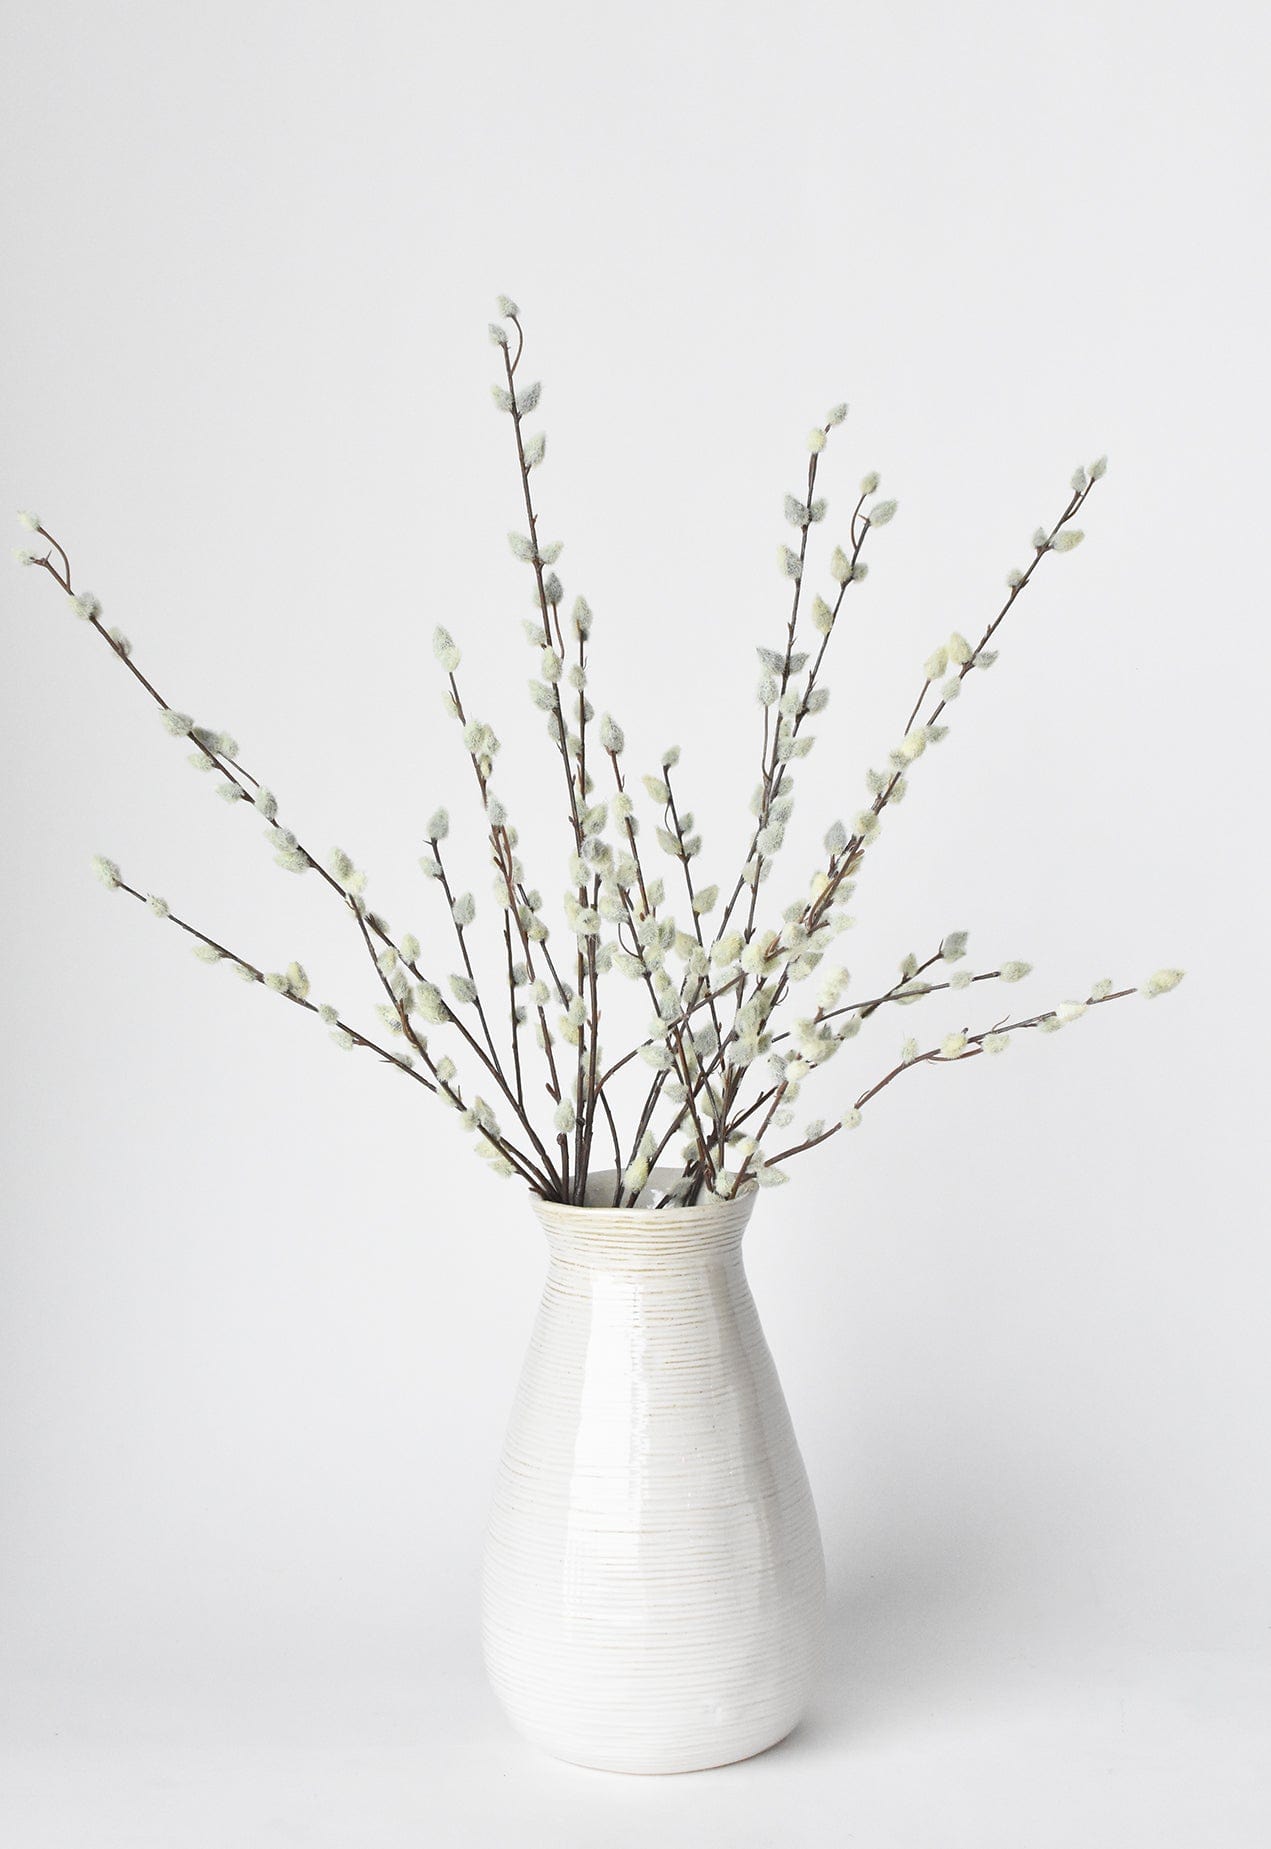 Vickerman 36 Artificial Gray Pussy Willow Bush - 36-inch Faux Floral Stems  for Elegant Decor - Realistic Pussywillow Branches for Vases 